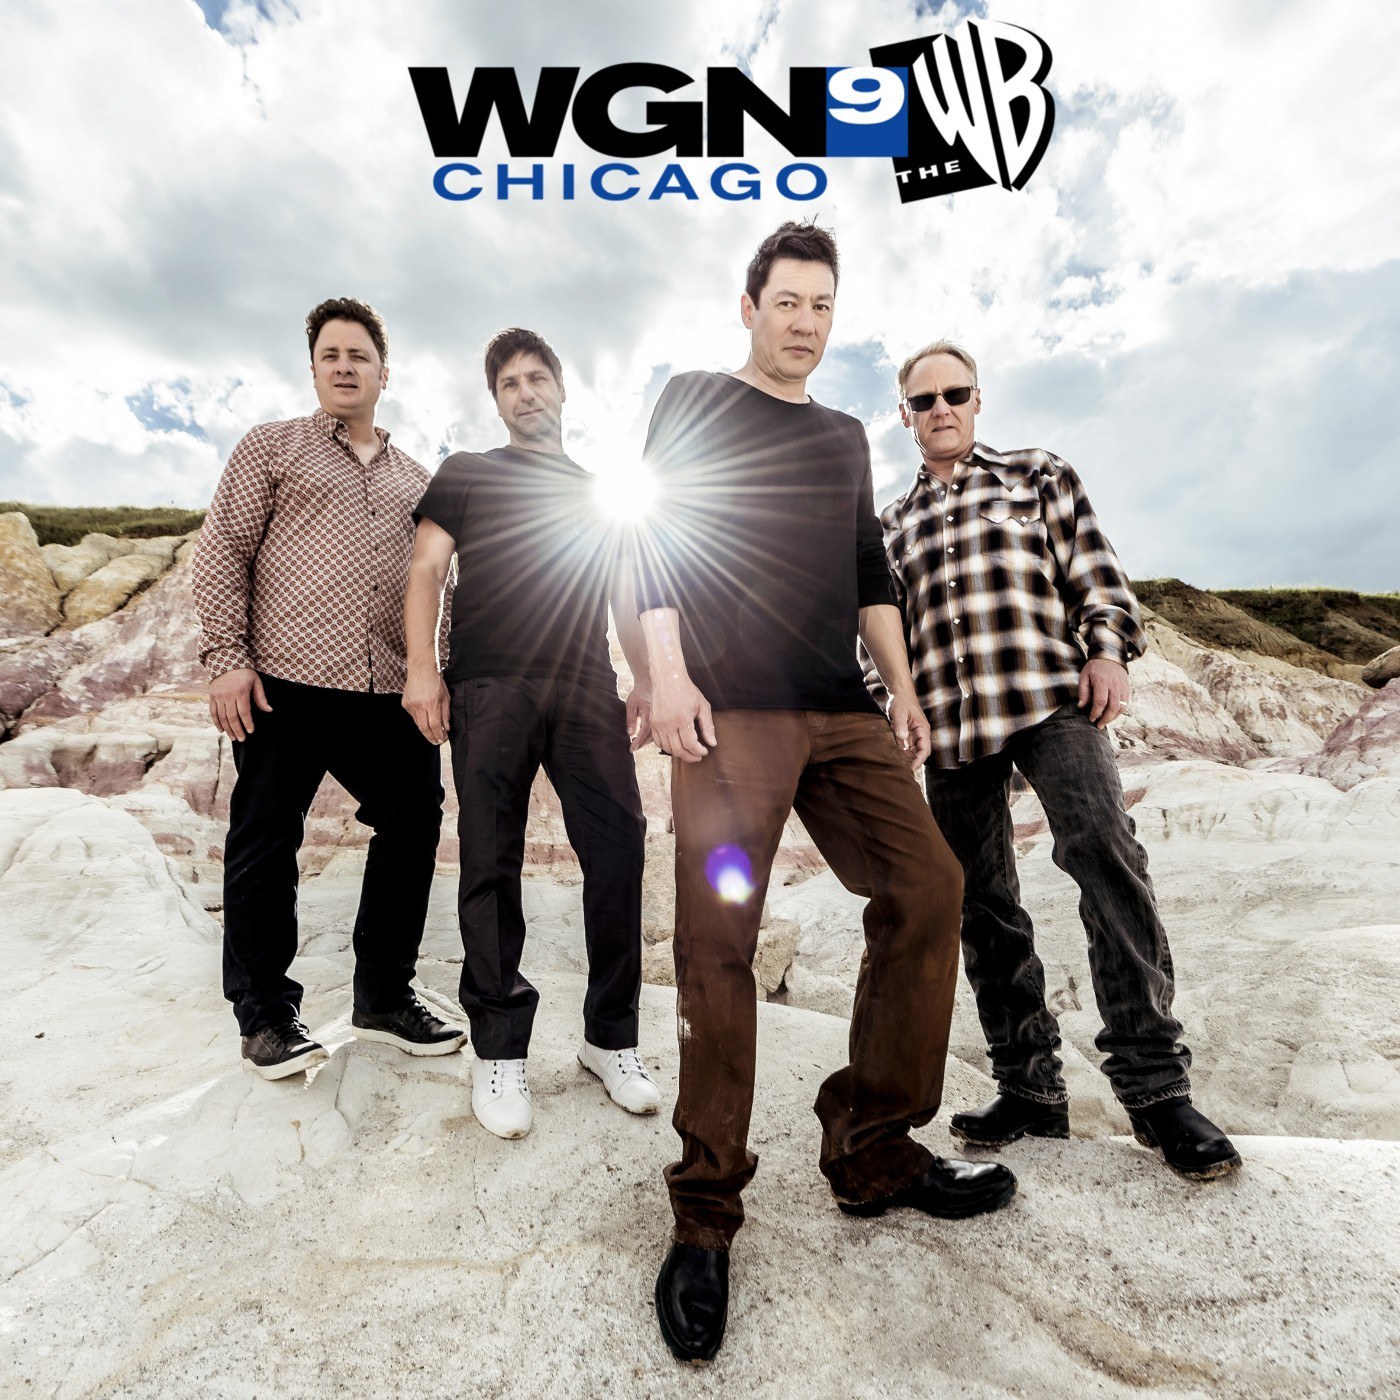 Big Head Todd LIVE on WGN News Chicago TOMORROW between 7am -10am (CST)!